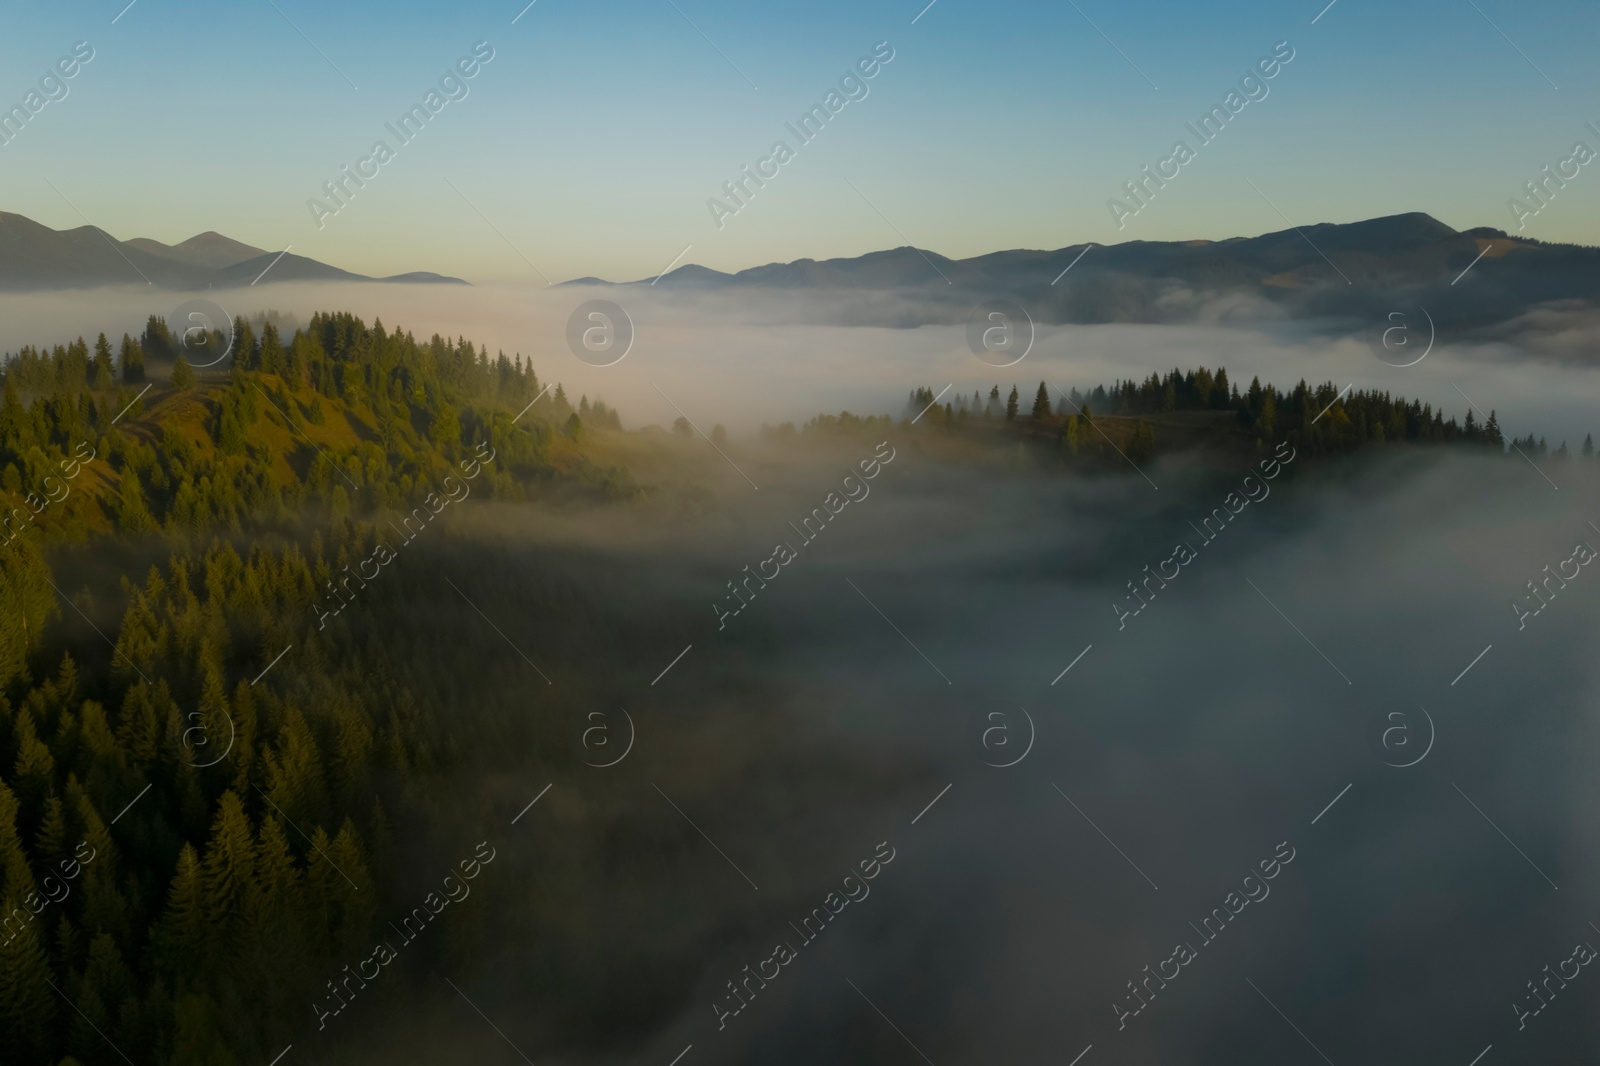 Image of Aerial view of beautiful landscape with misty forest in mountains